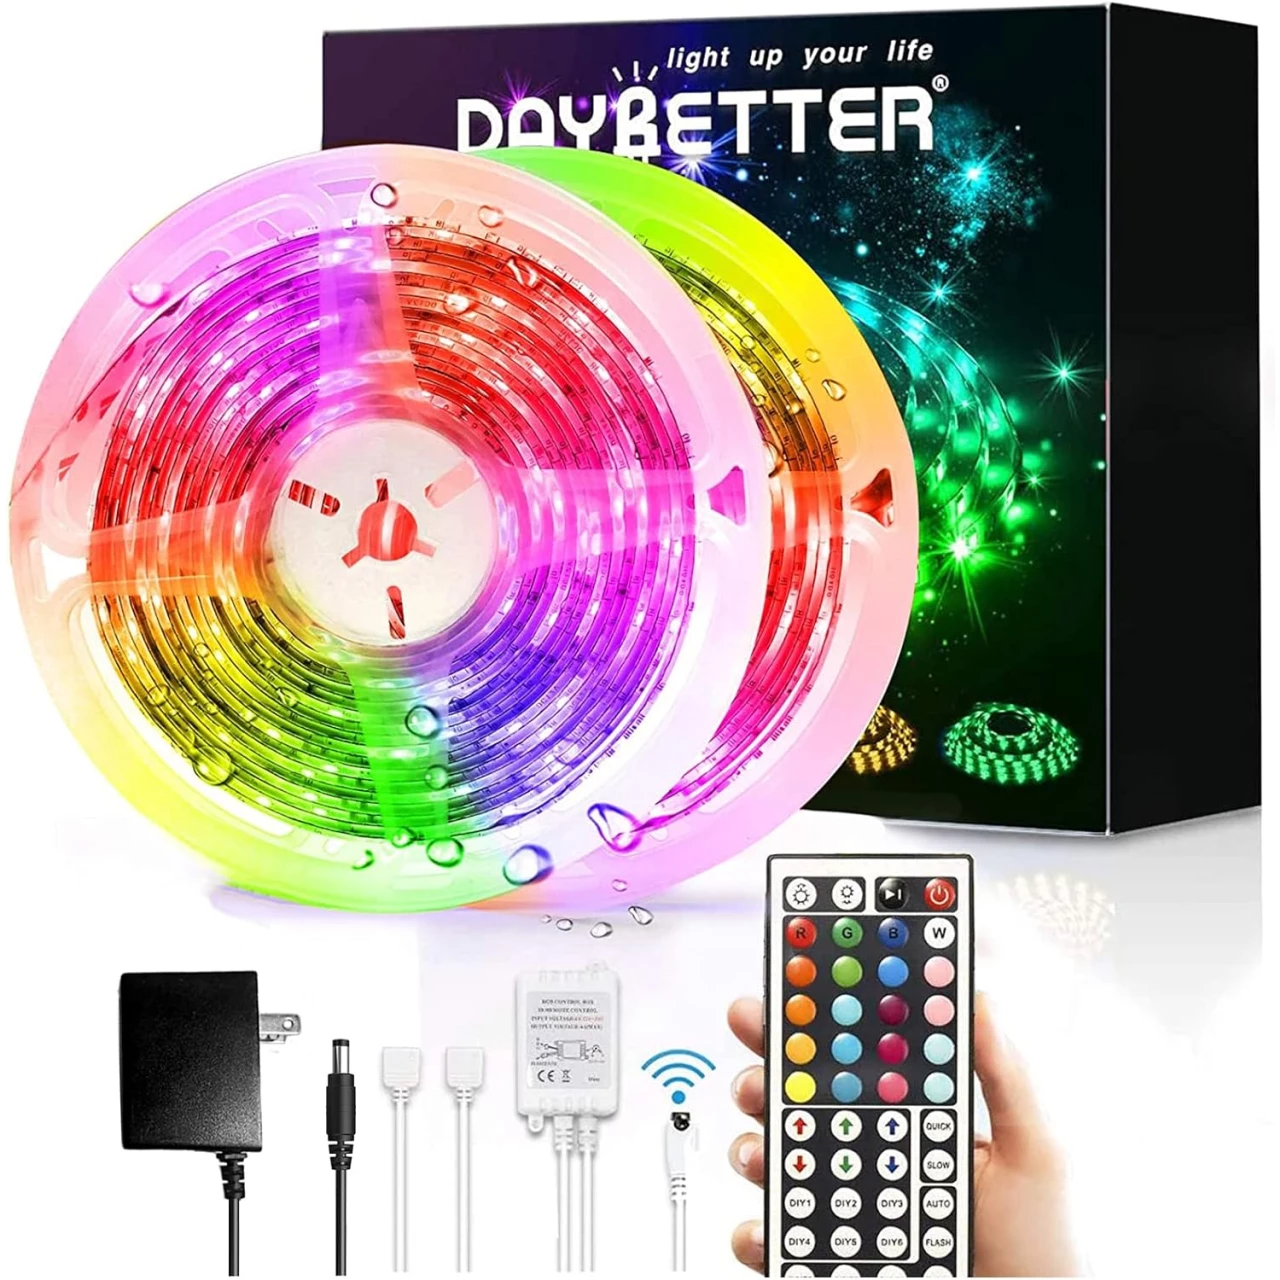 DAYBETTER Led Strip Lights Waterproof, 32.8ft(2 Rolls of 16.4ft) LED Tape Lights Color Changing 300 LEDs Light Strips Kit with 44 Keys Ir Remote Controller and 12v Power Supply for Indoor Outdoor Use